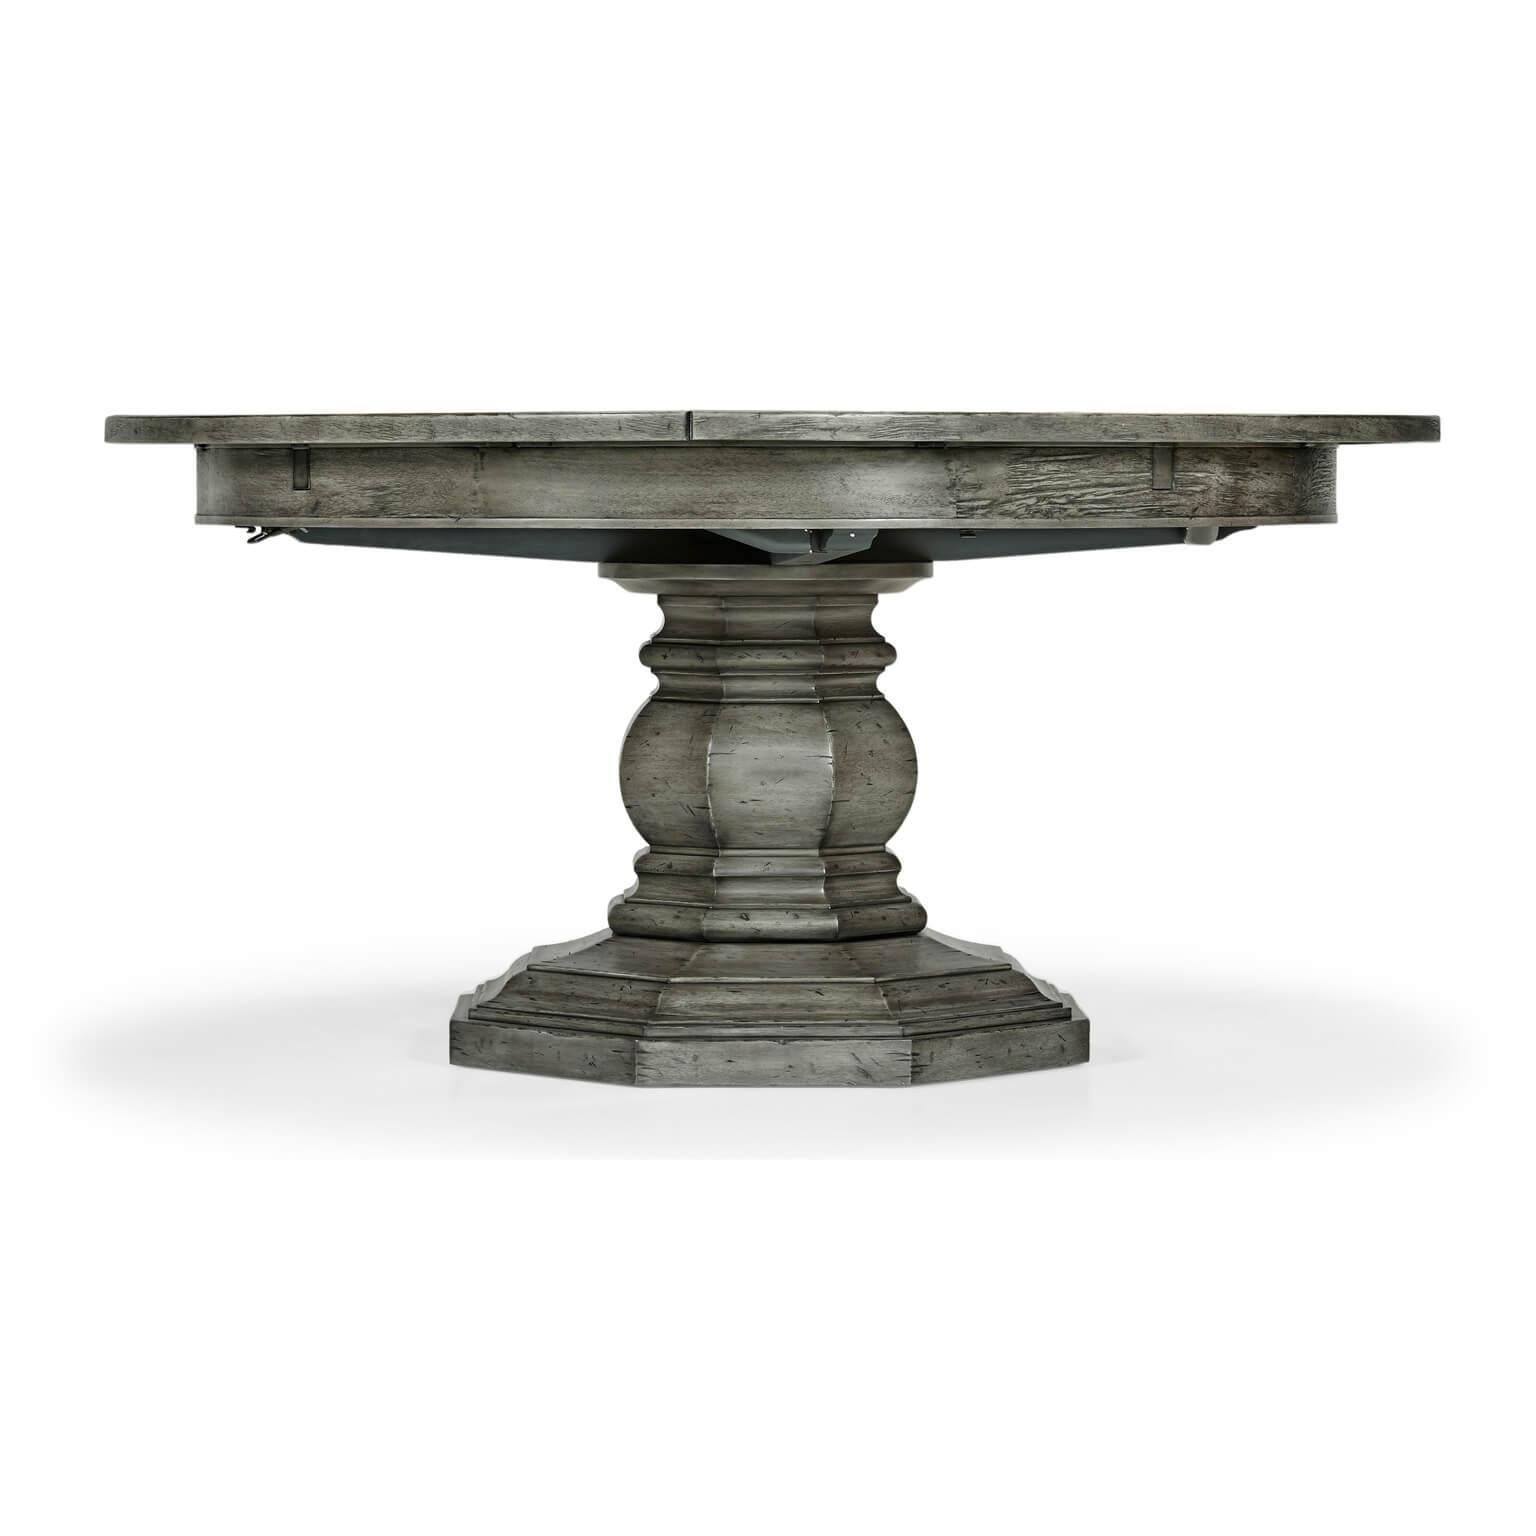 Antique dark grey topped circular dining table with a rustic finish showing exposed saw marks set on a substantial baluster stem base, the table extending via an ingenious mechanism of self-storing hinged fold-out leaves within. 

Open dimensions: